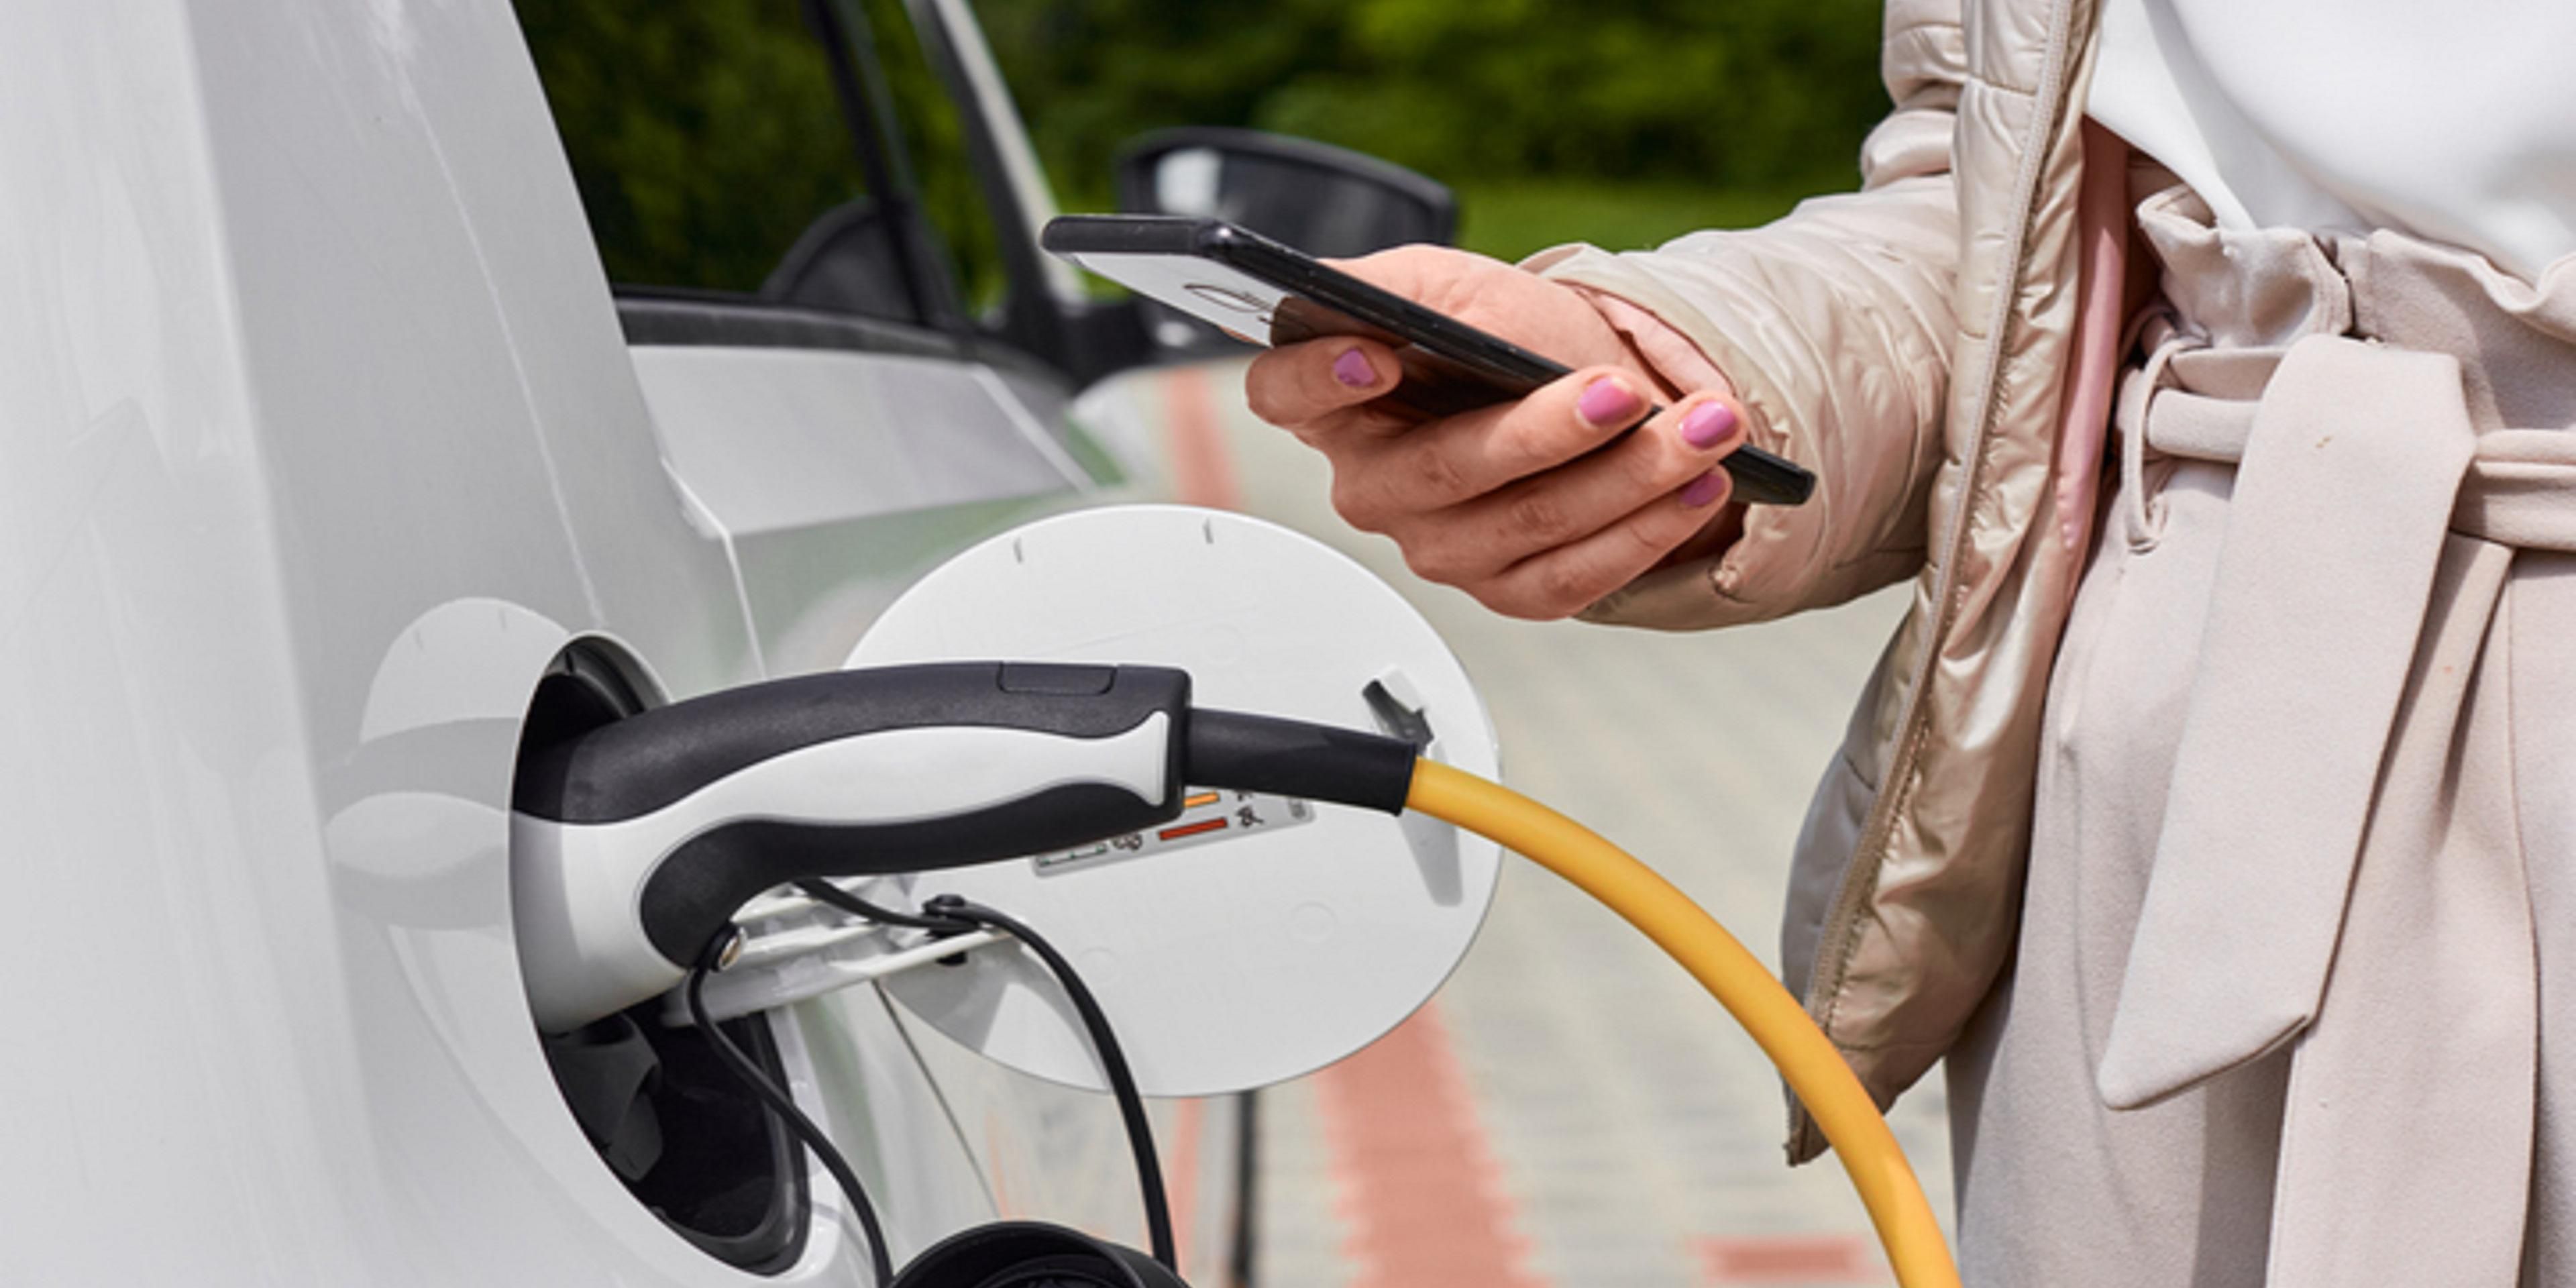 If you drive an electric vehicle, visit one of our convenient electronic charging stations within walking distance to hotel during your stay. 